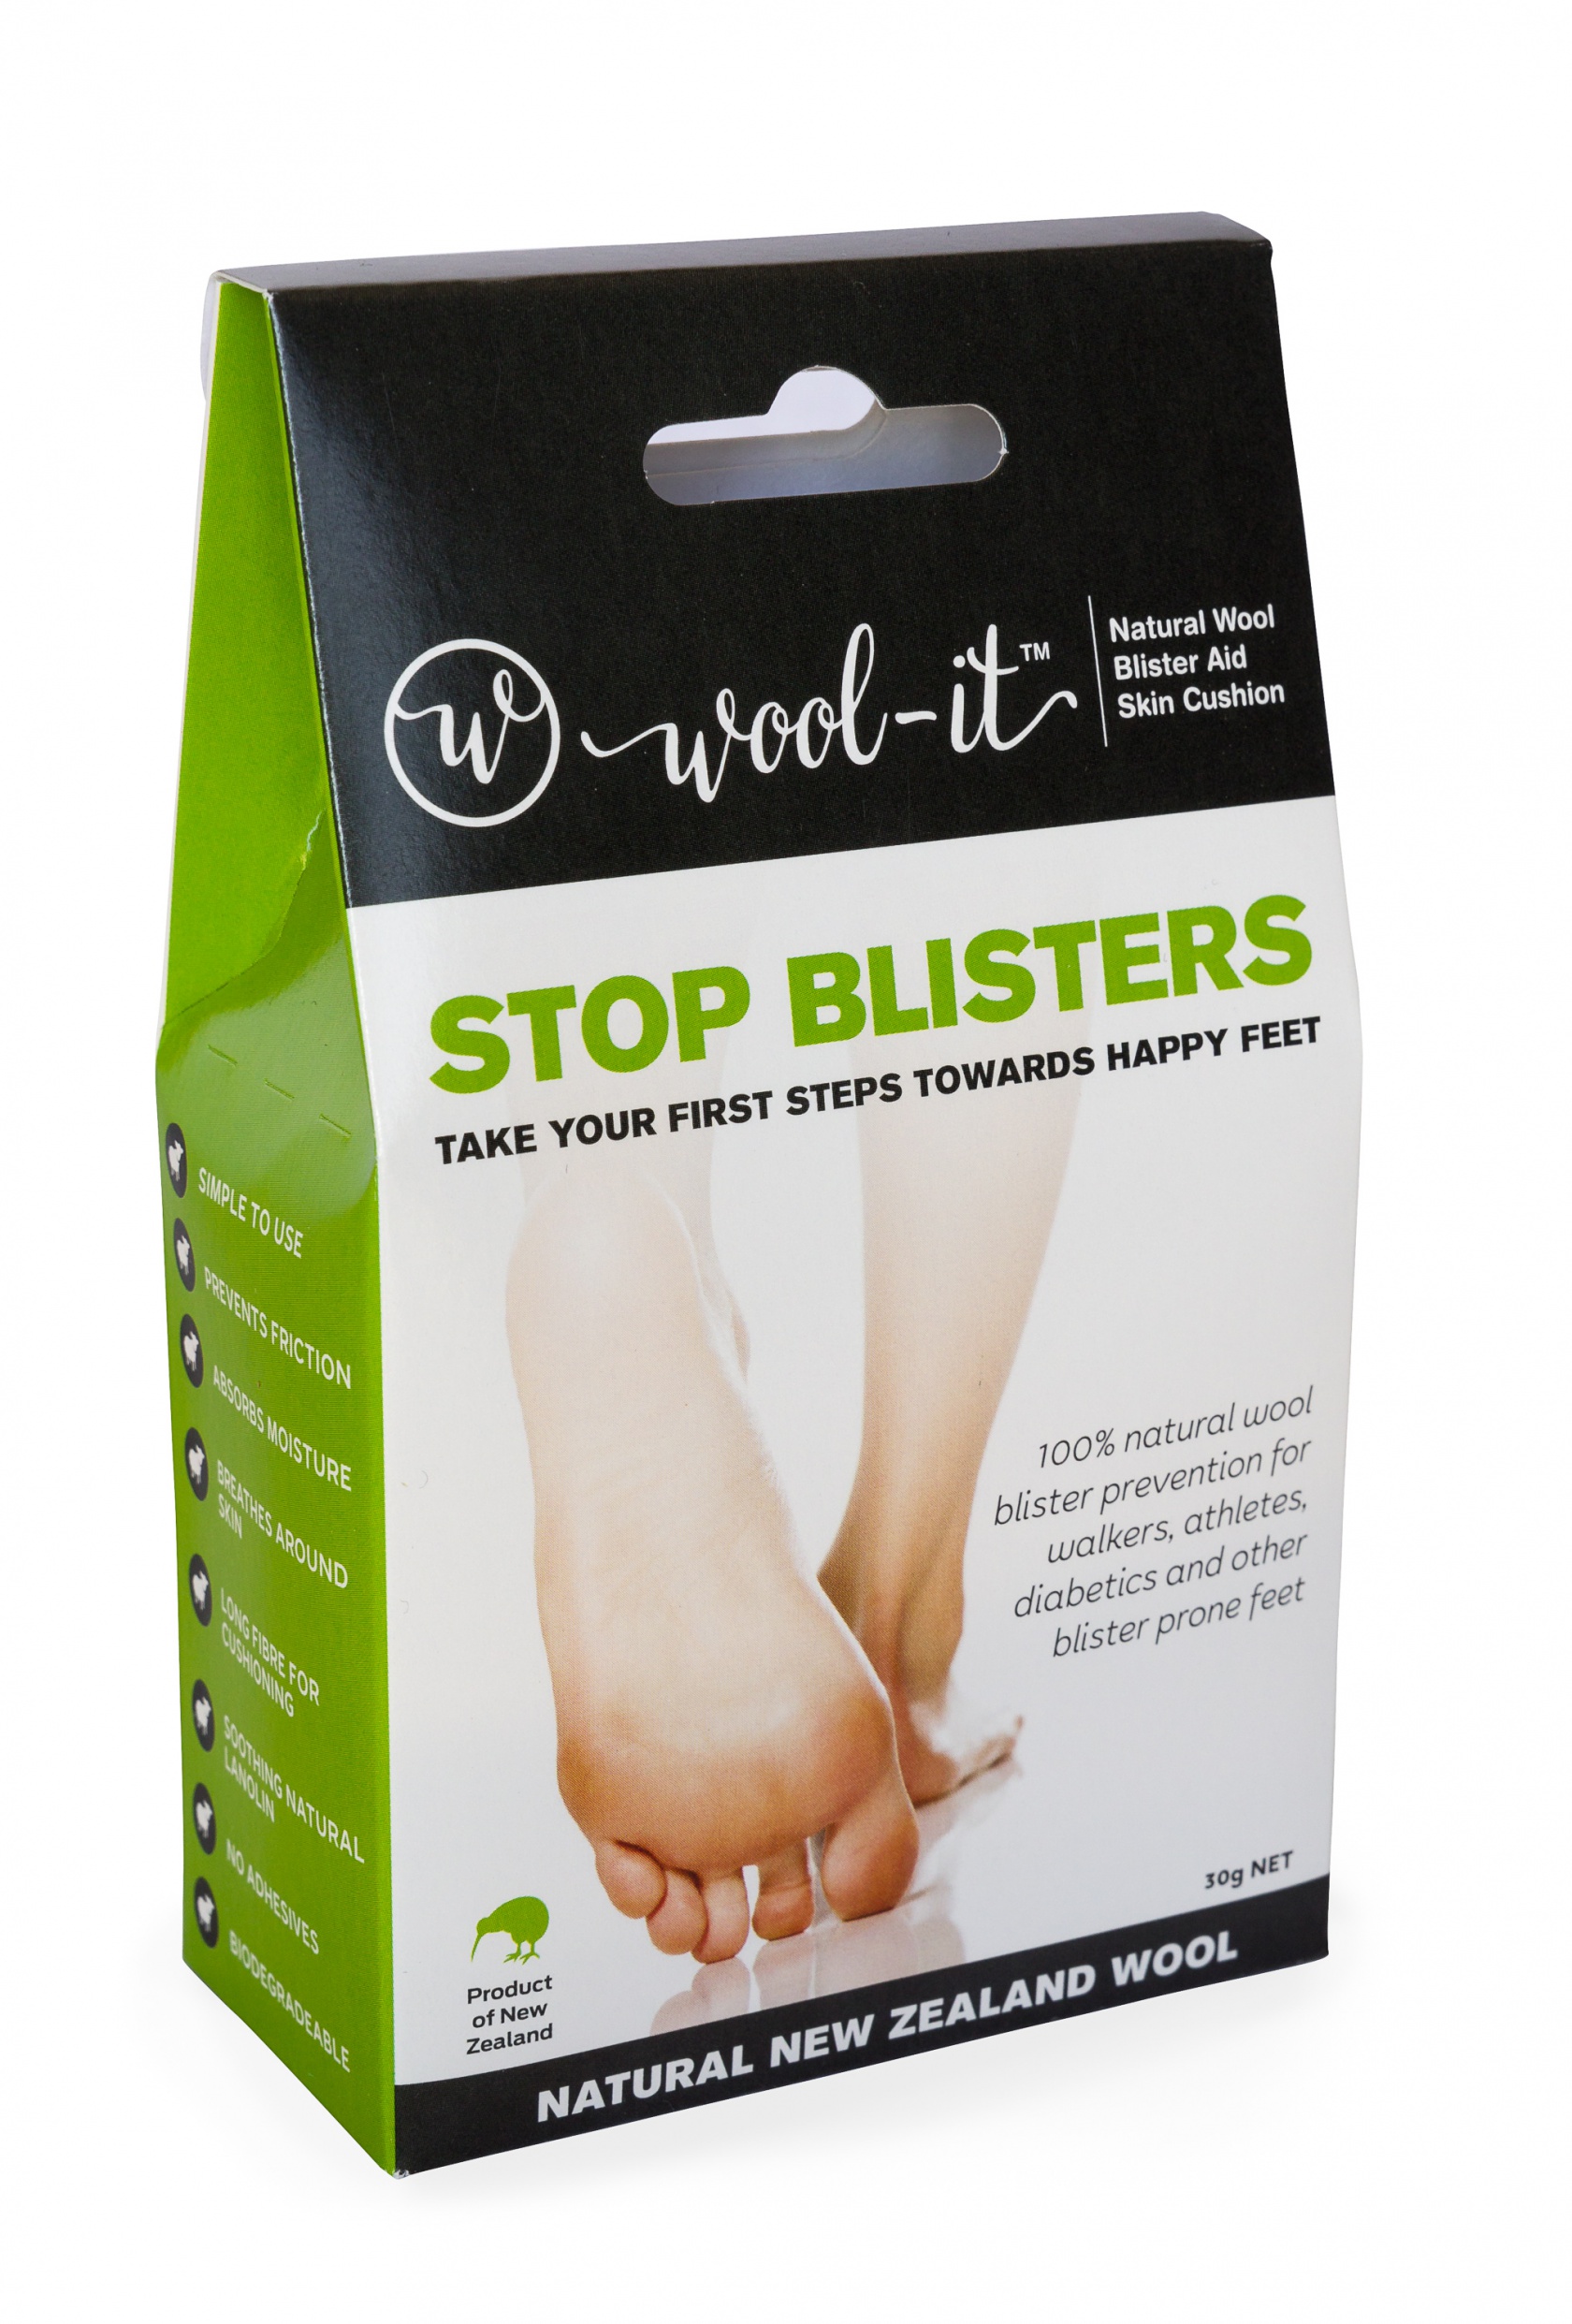 Wool-it Blister Prevention 30g Box image 0